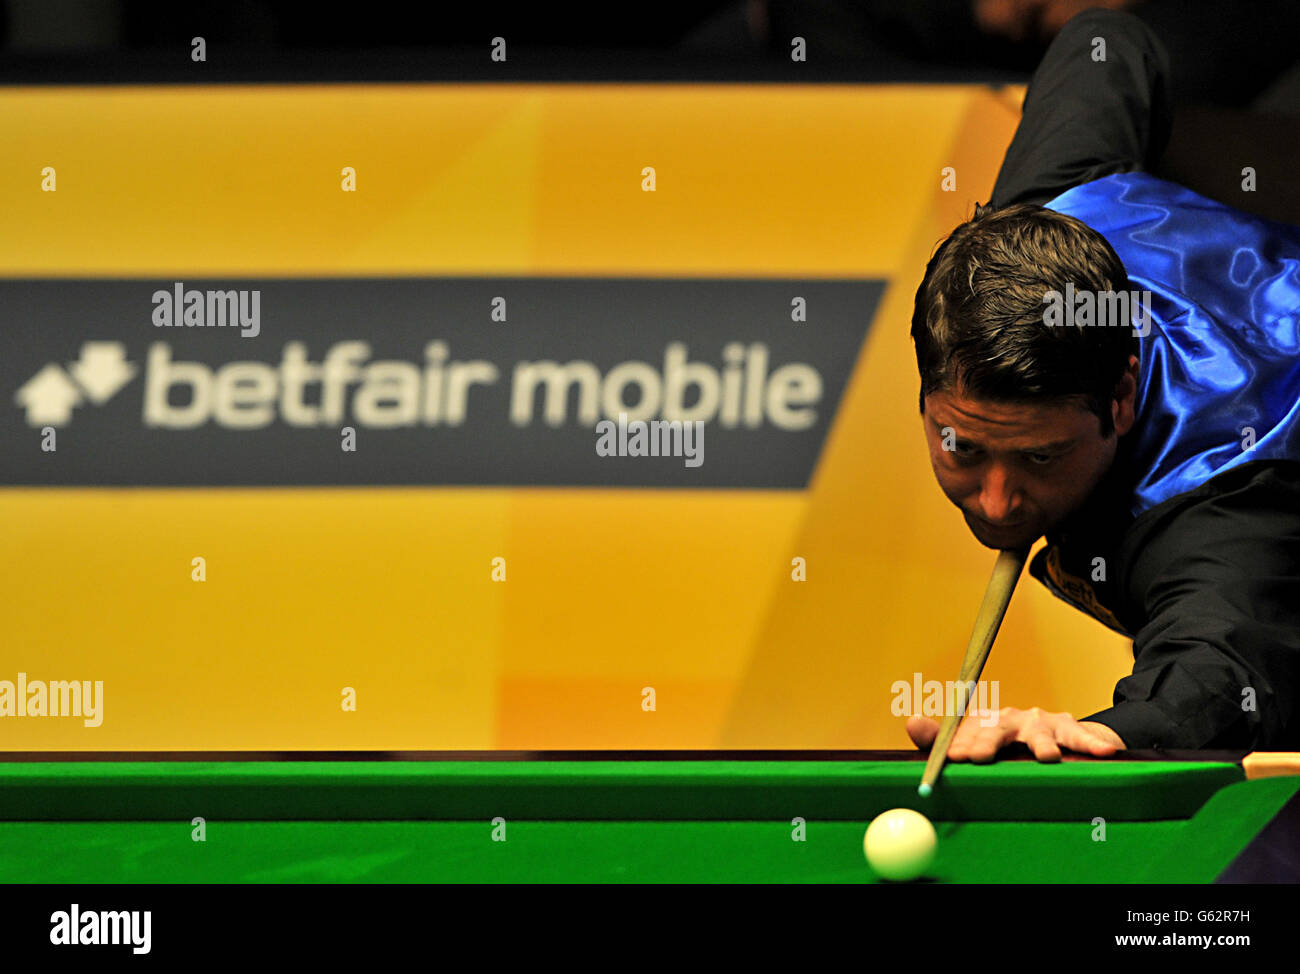 Matthew Stevens during his first round match against Marco Fu during the Betfair World Championships at the Crucible, Sheffield. PRESS ASSOCIATION Photo. Picture date: Wednesday April 24, 2013. See PA Story SNOOKER World. Photo credit should read: Simon Cooper/PA Wire. Stock Photo